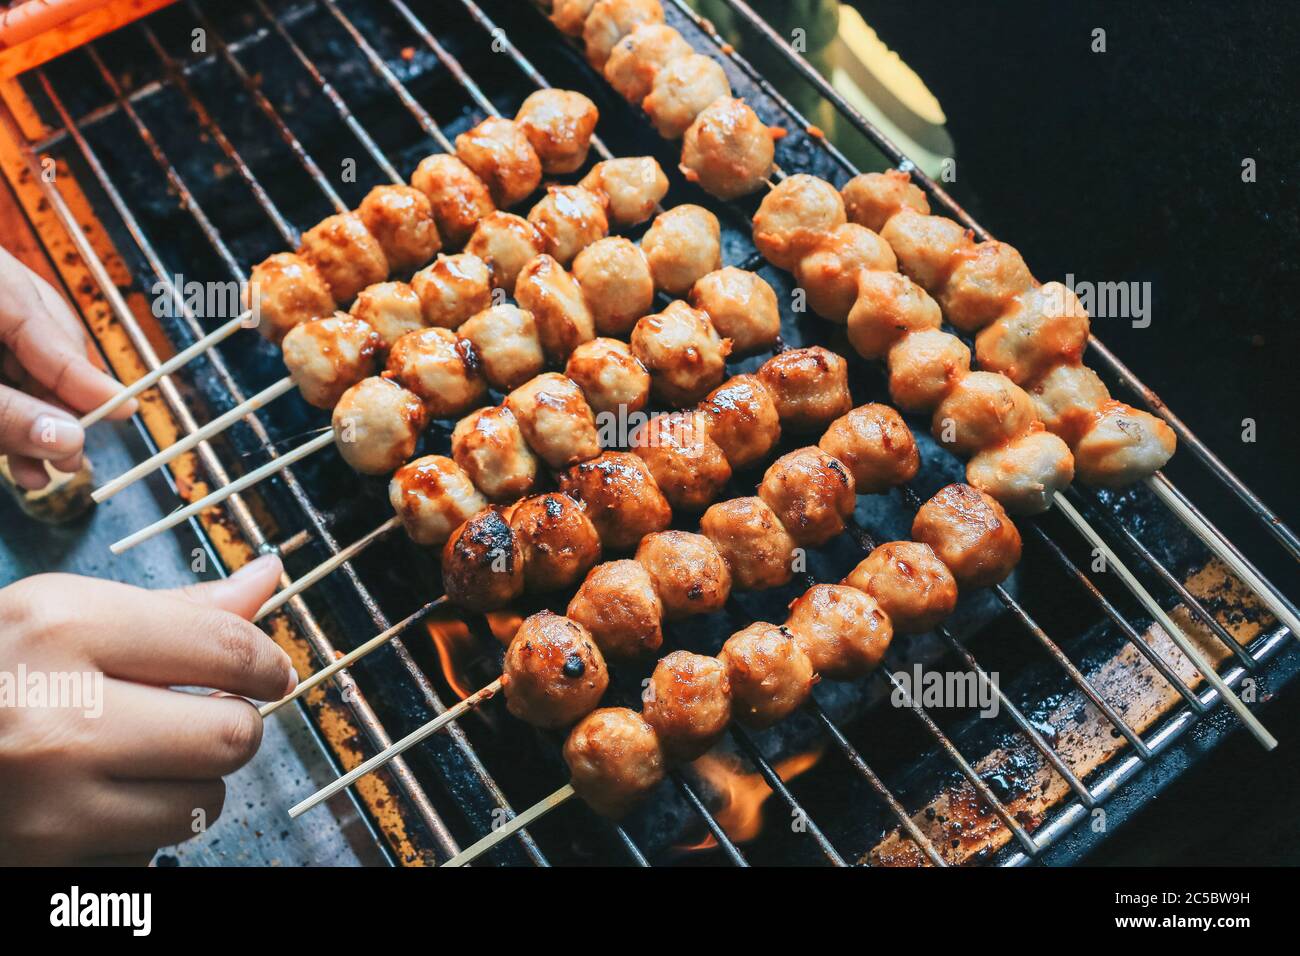 Cooking Barbecue Meatball Satay In Grilling Stove This Is Indonesian